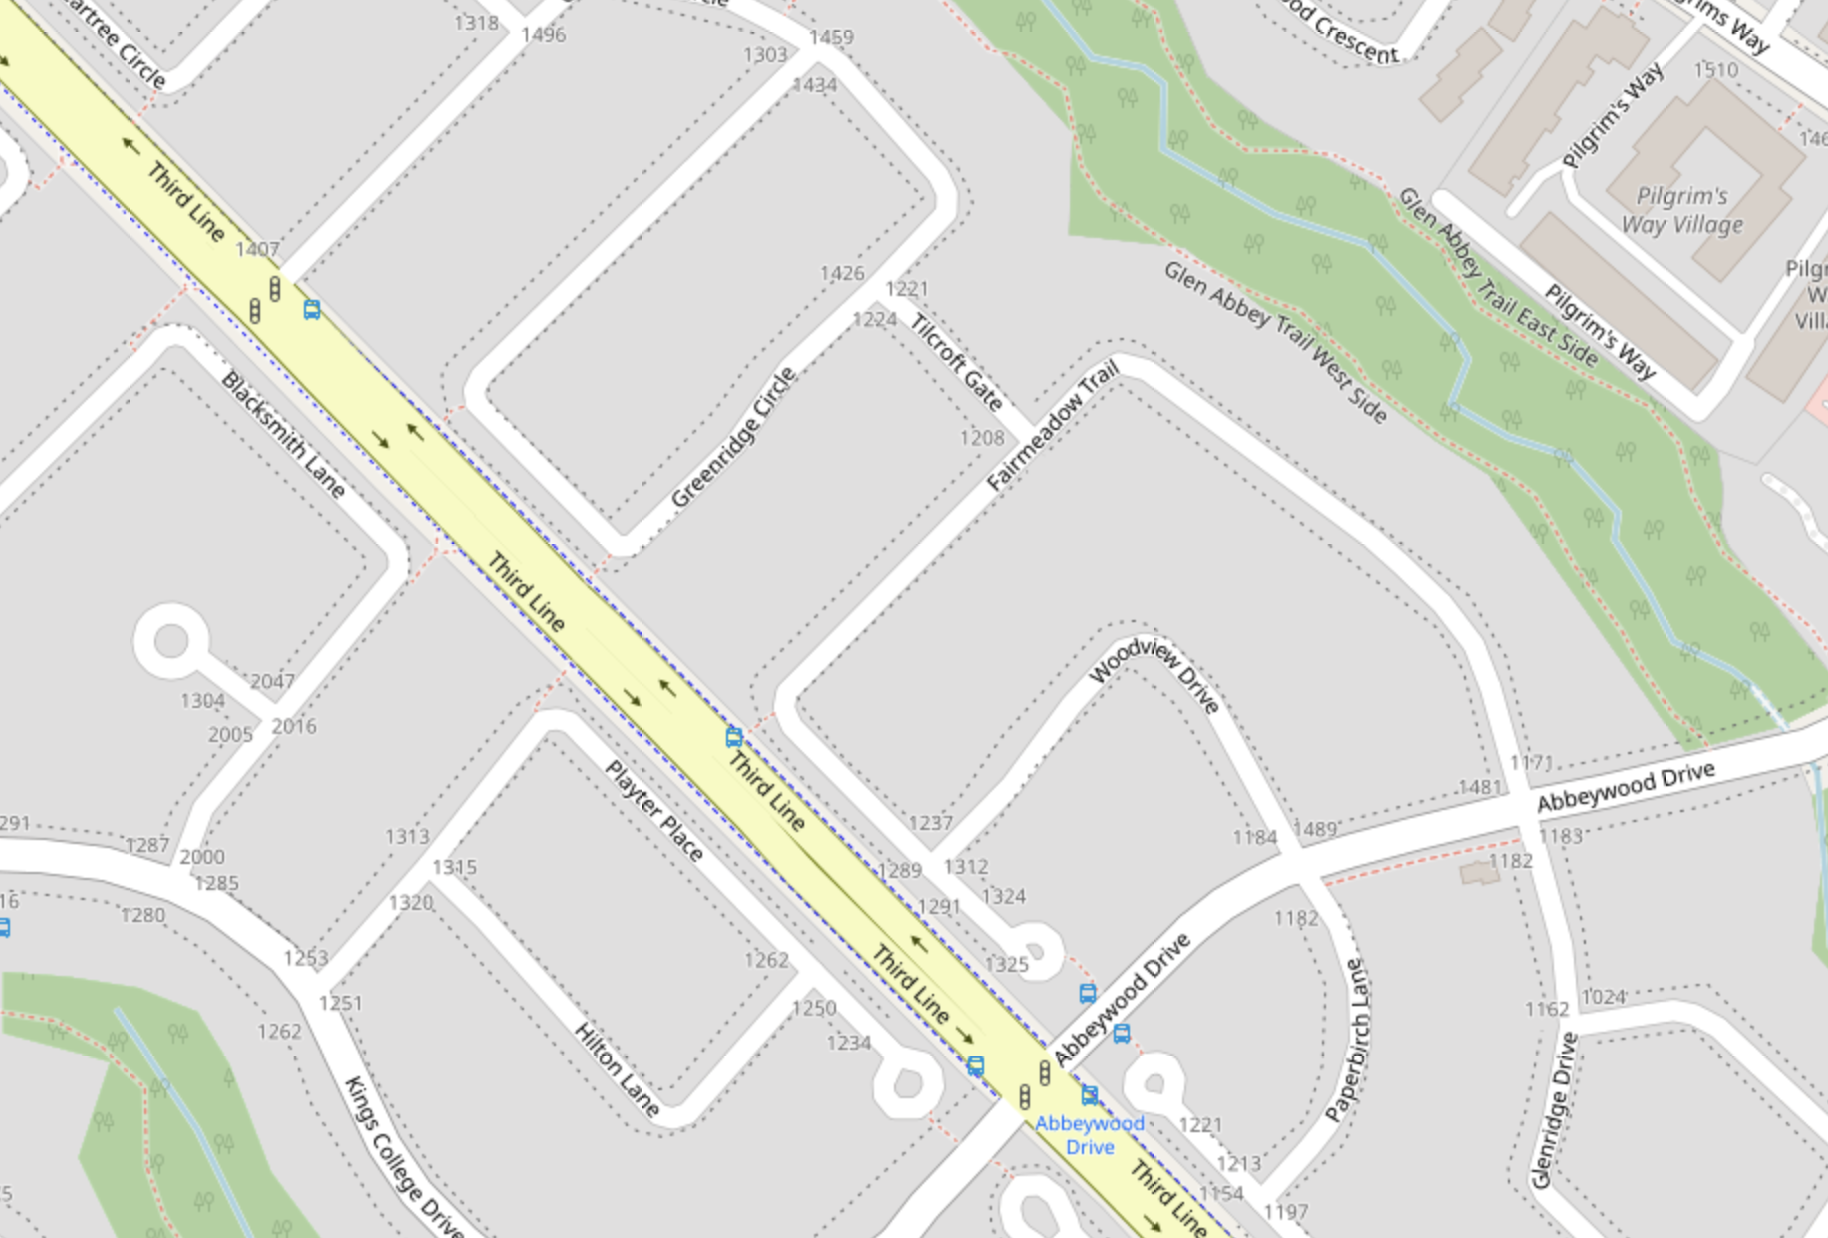 Fairmeadow Trail, the location of the attempted burglary | Openstreetmap